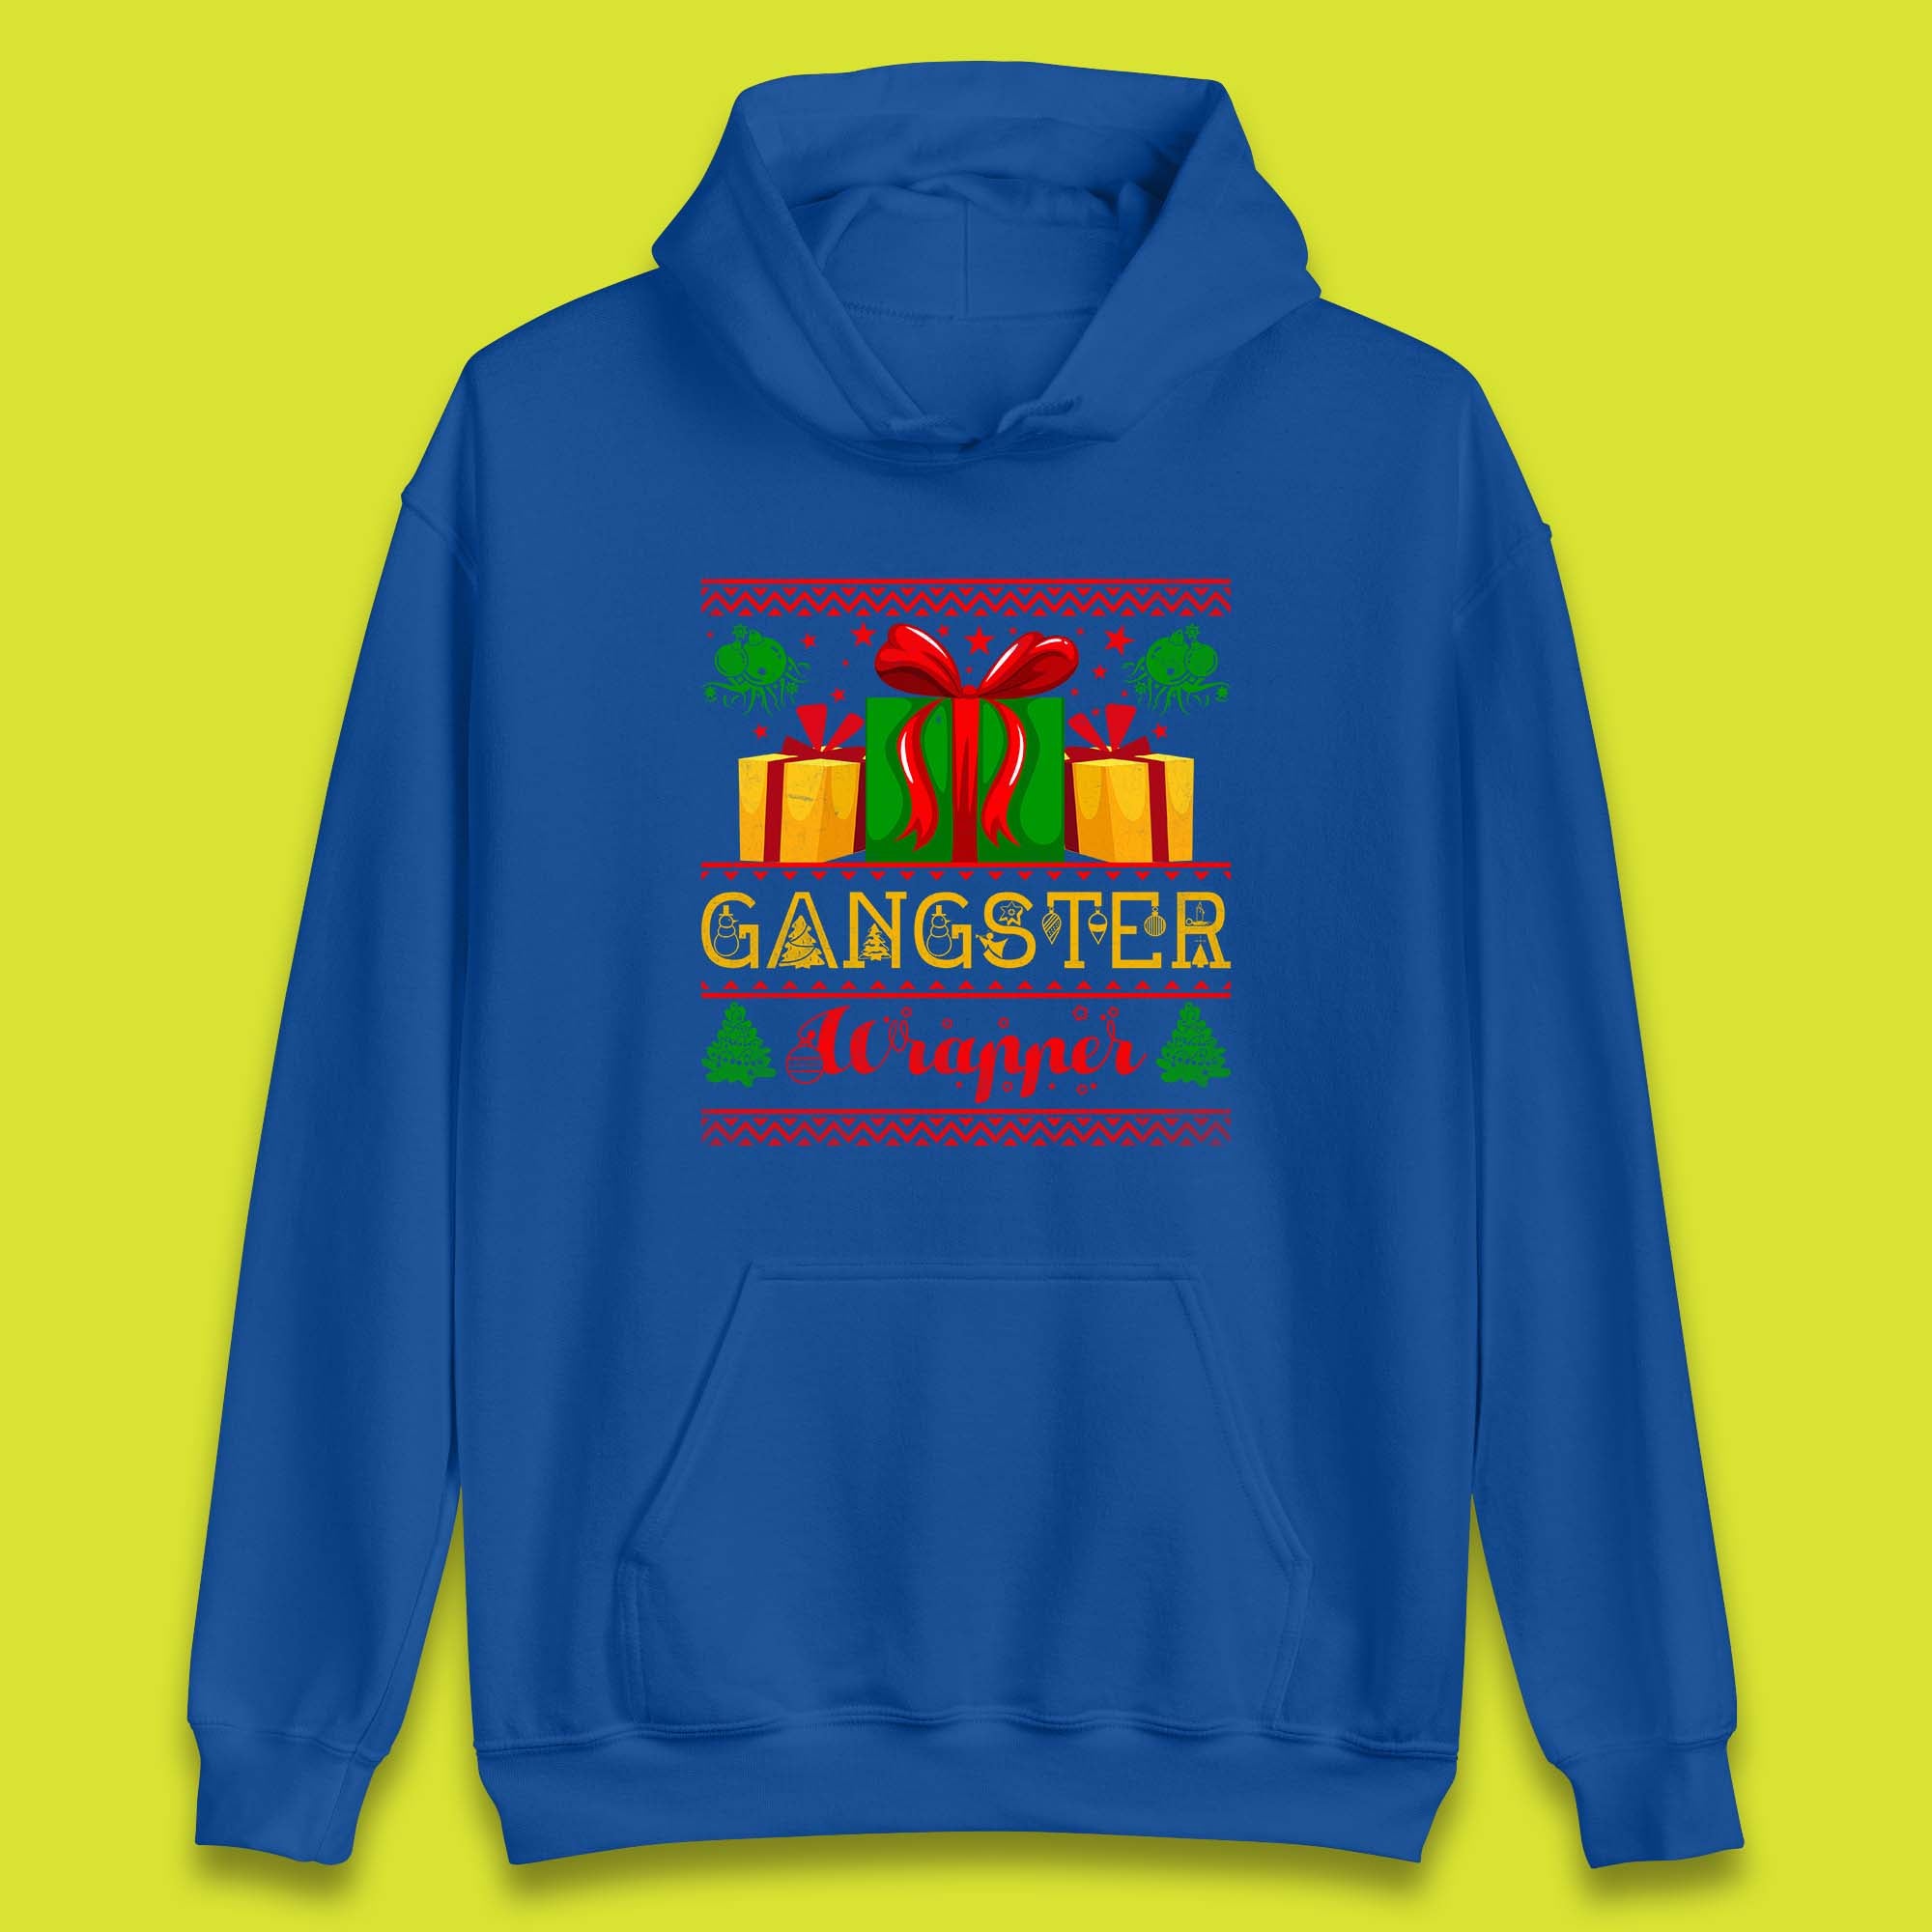 Gangster Wrapper Christmas Gangster Wrappa Funny Xmas Gift Wrapping Unisex Hoodie